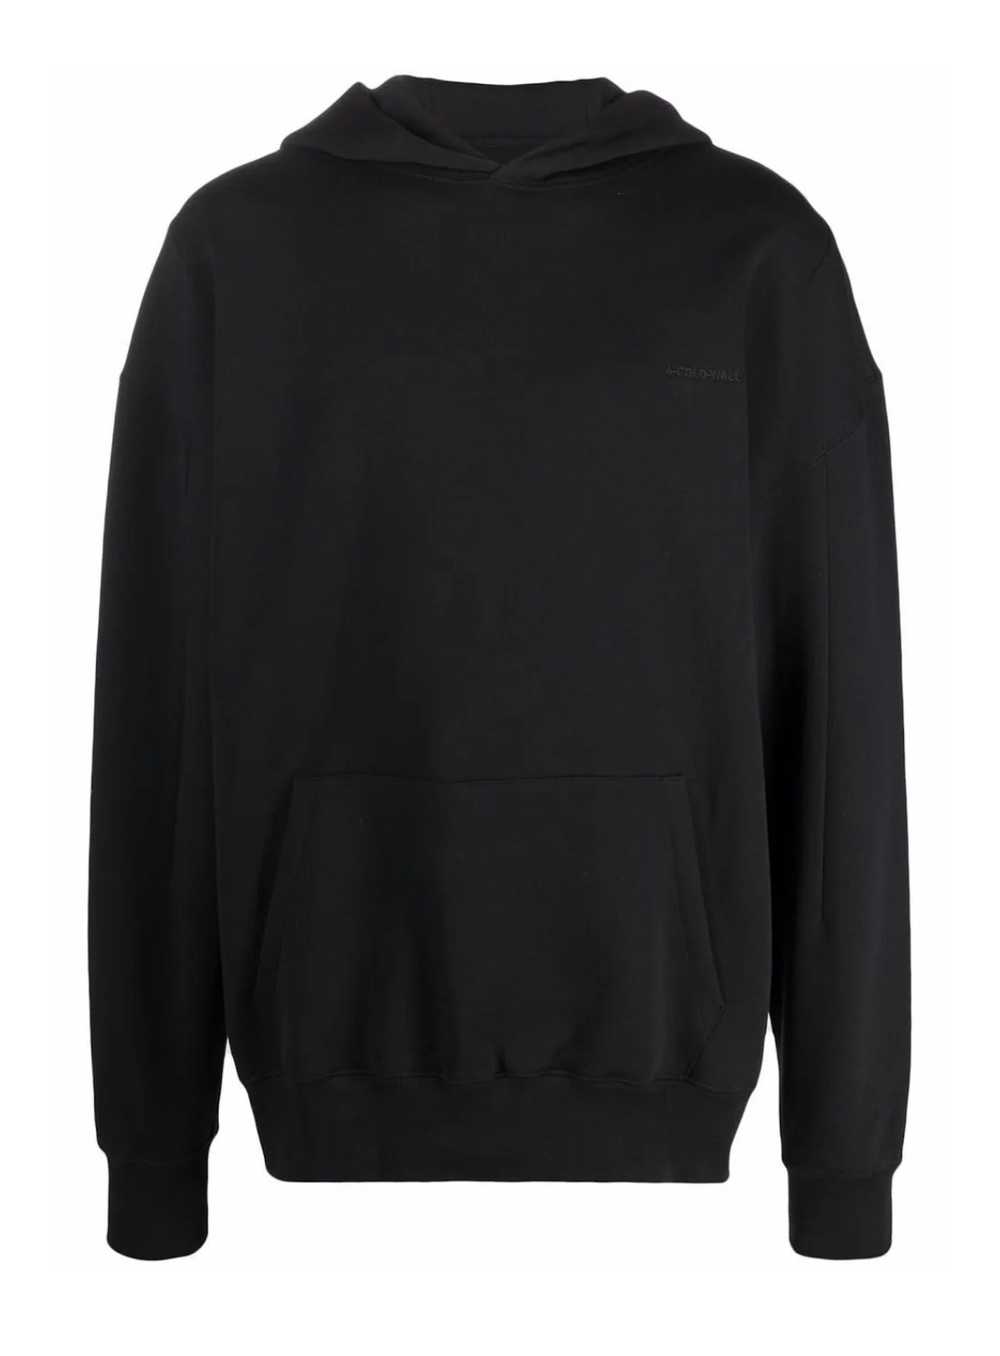 A Cold Wall A Cold Wall x Sweat Shirt / Hoodie - image 1